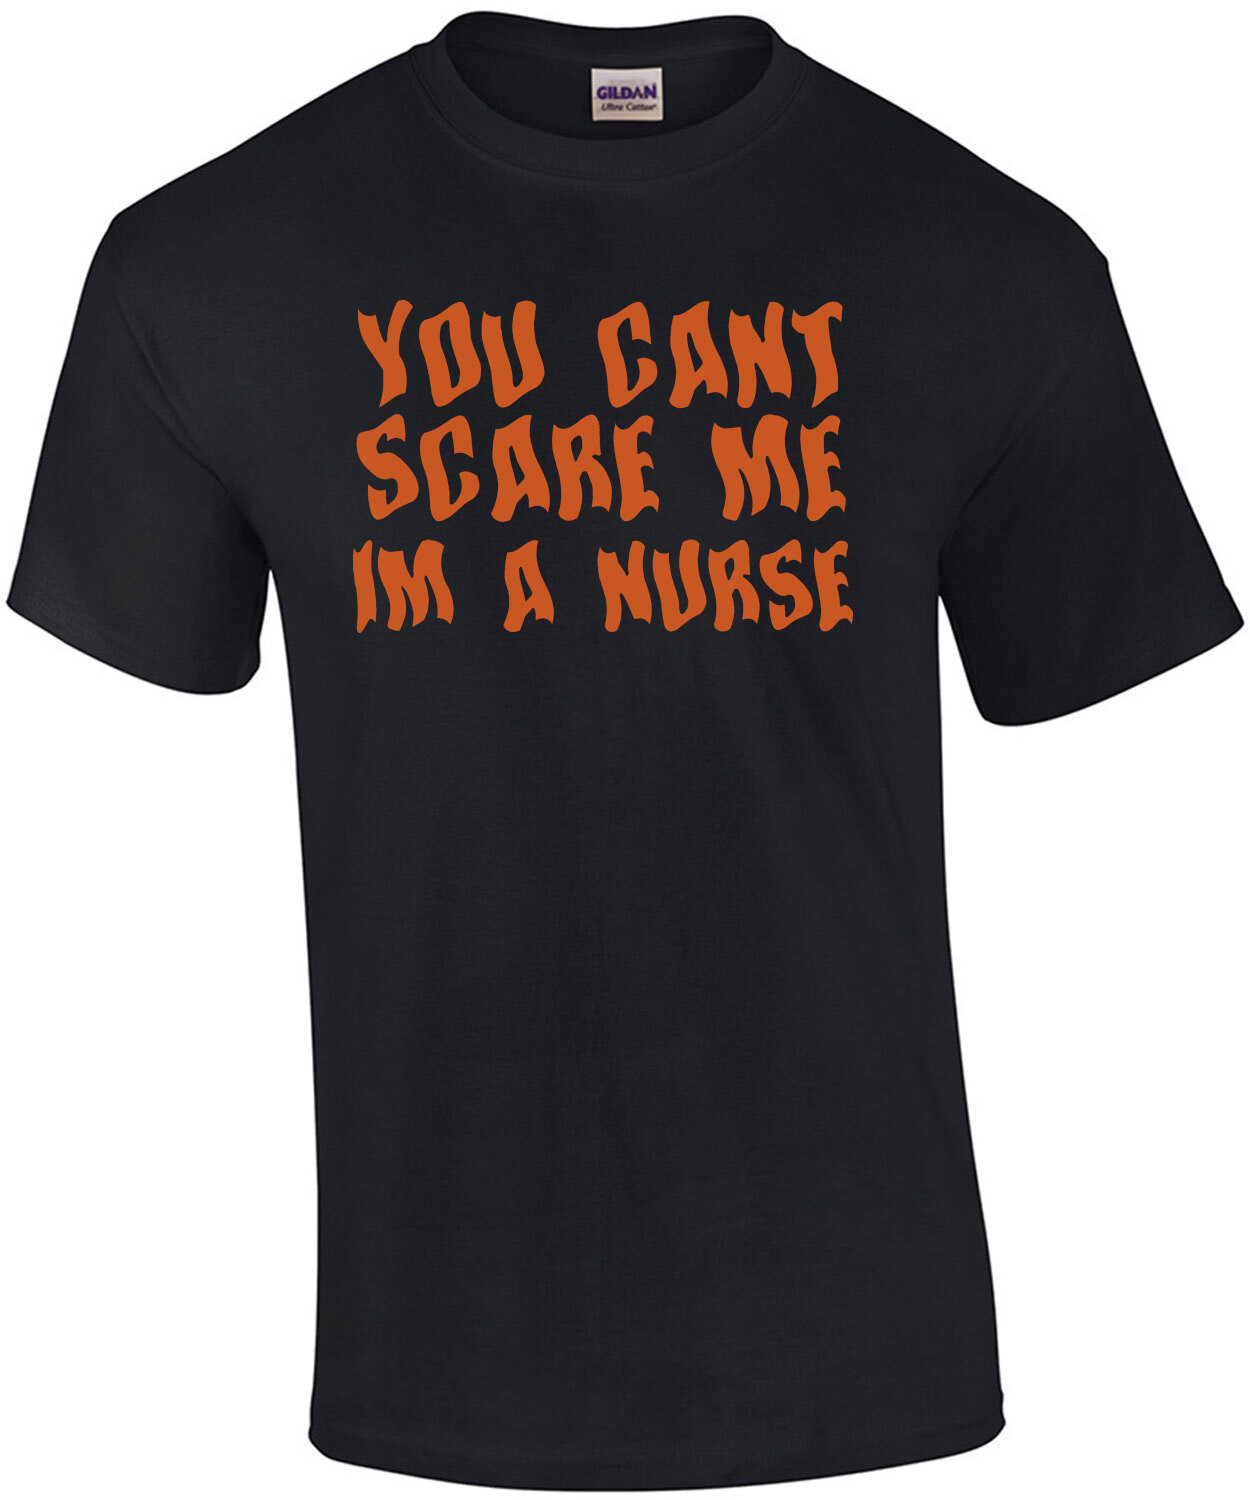 You can't scare me - halloween t-shirt